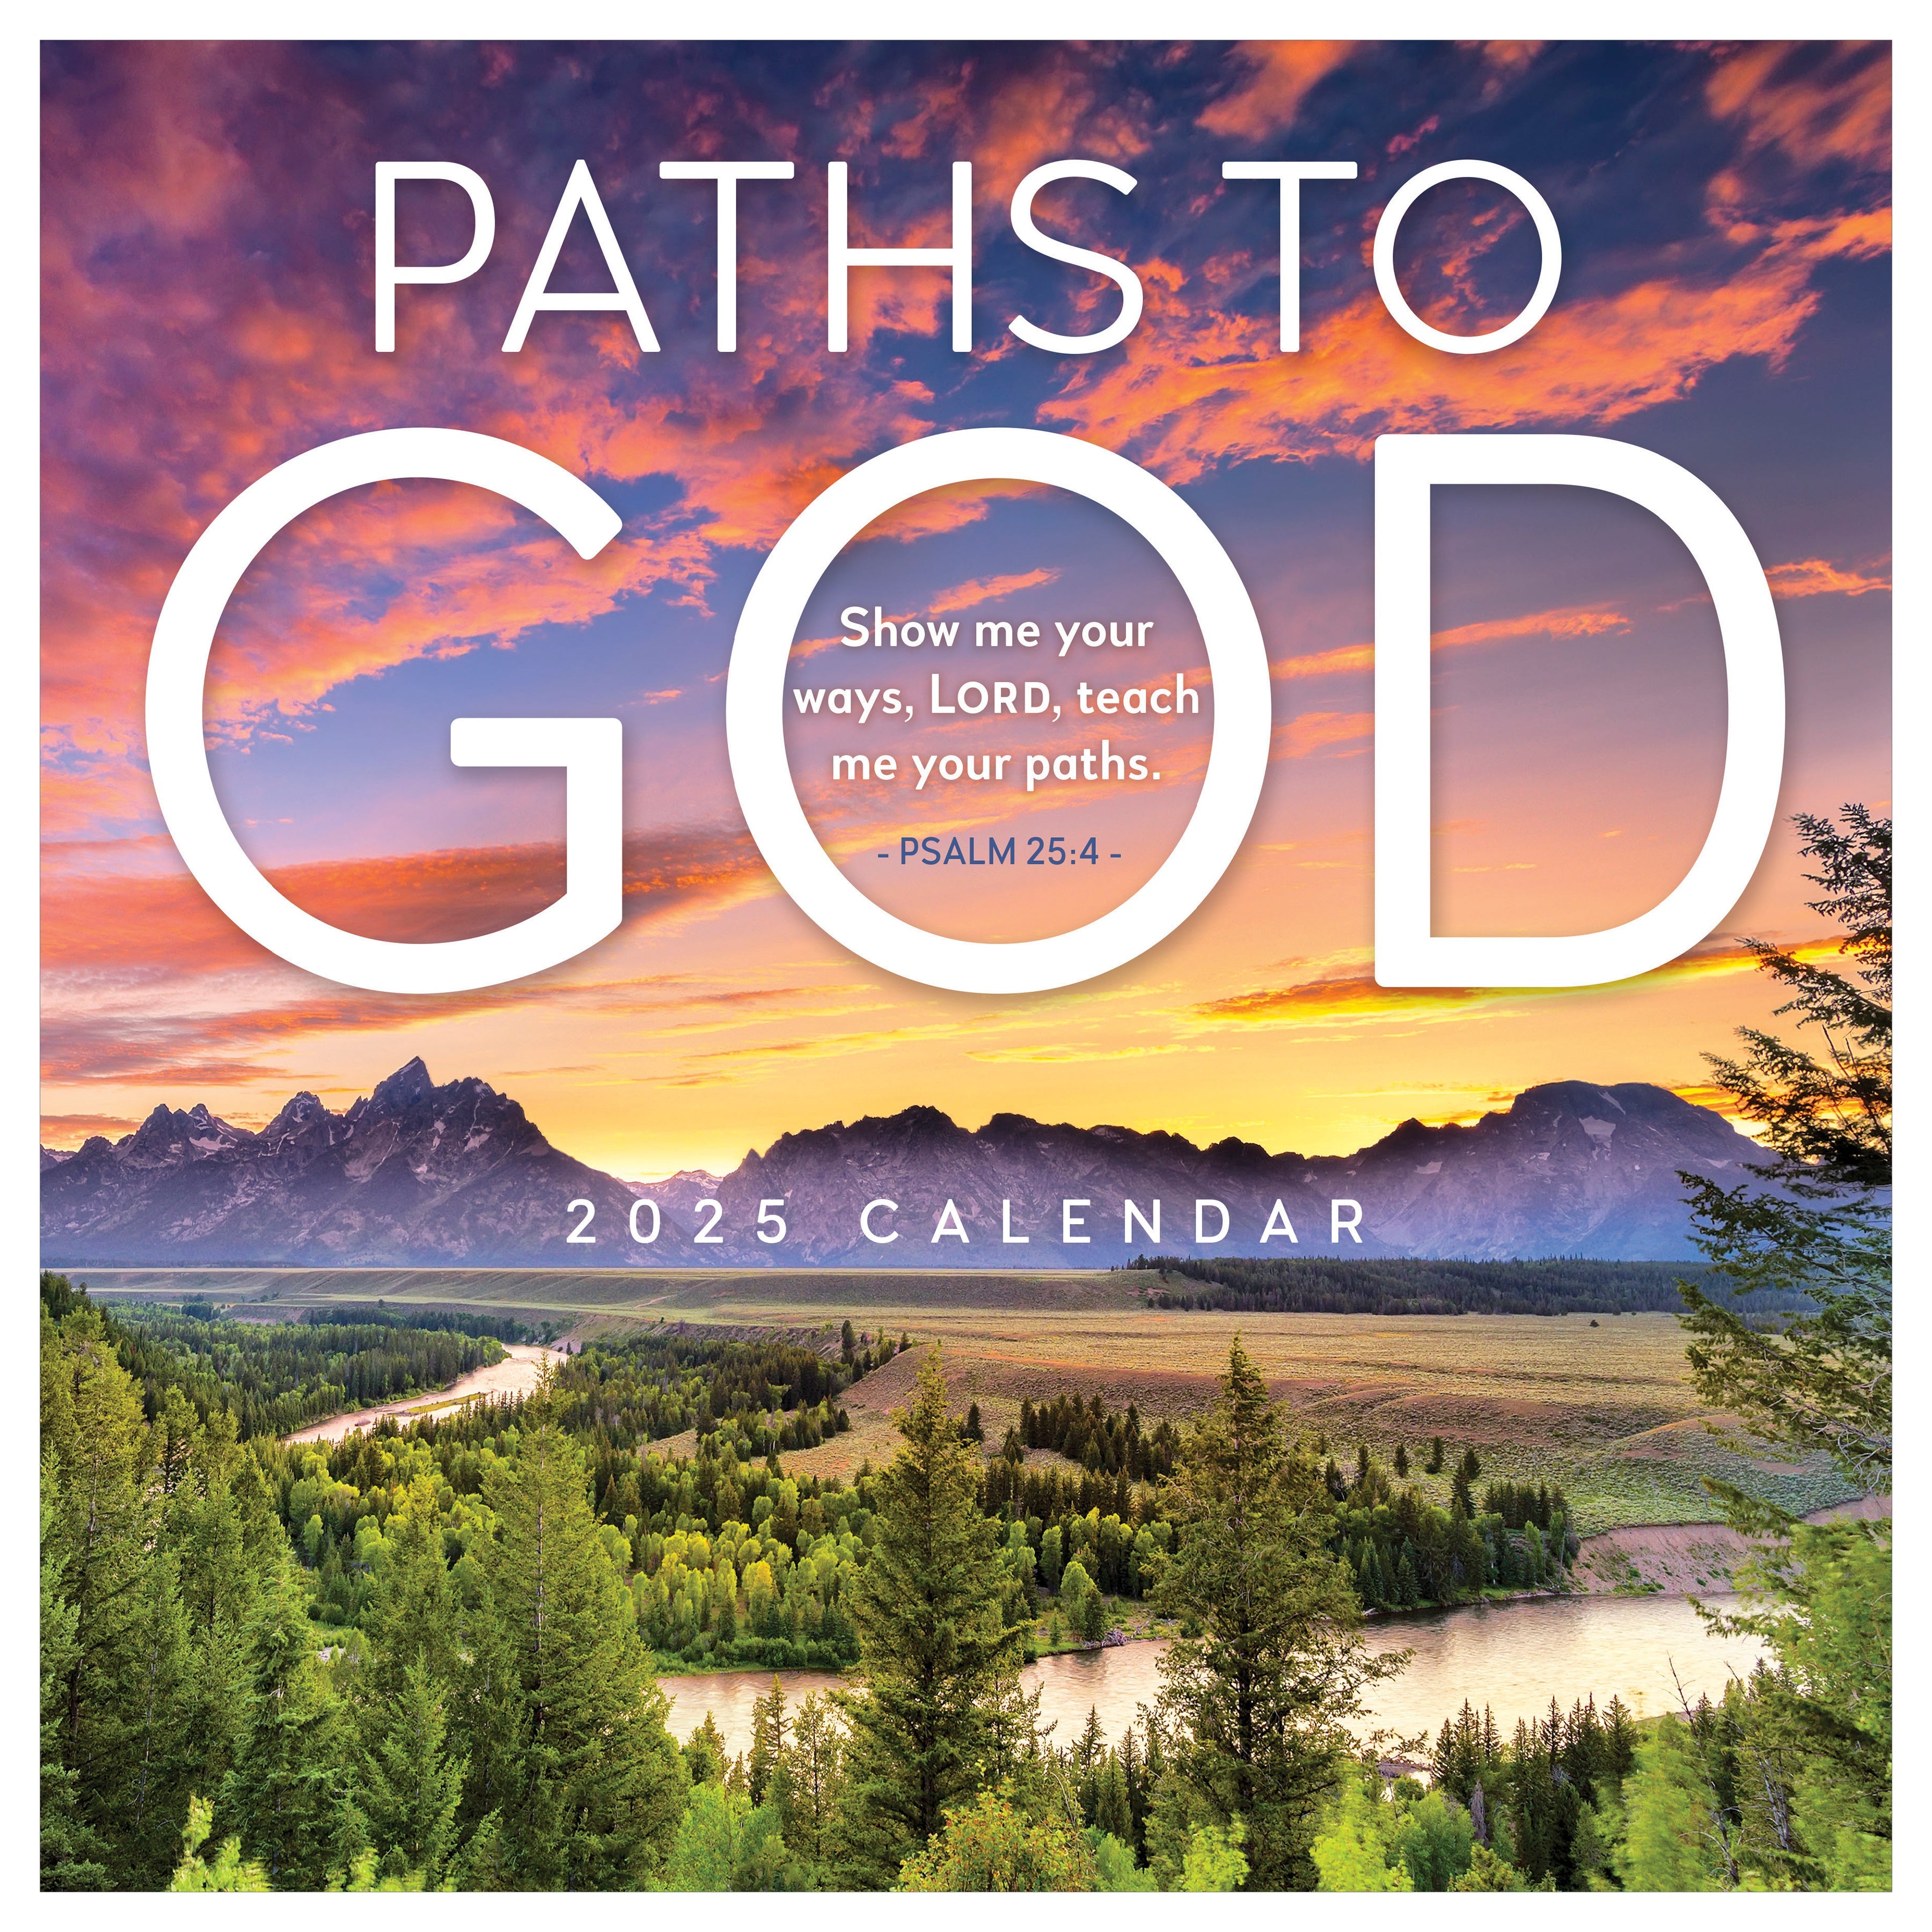 2025 Paths to God - Square Wall Calendar